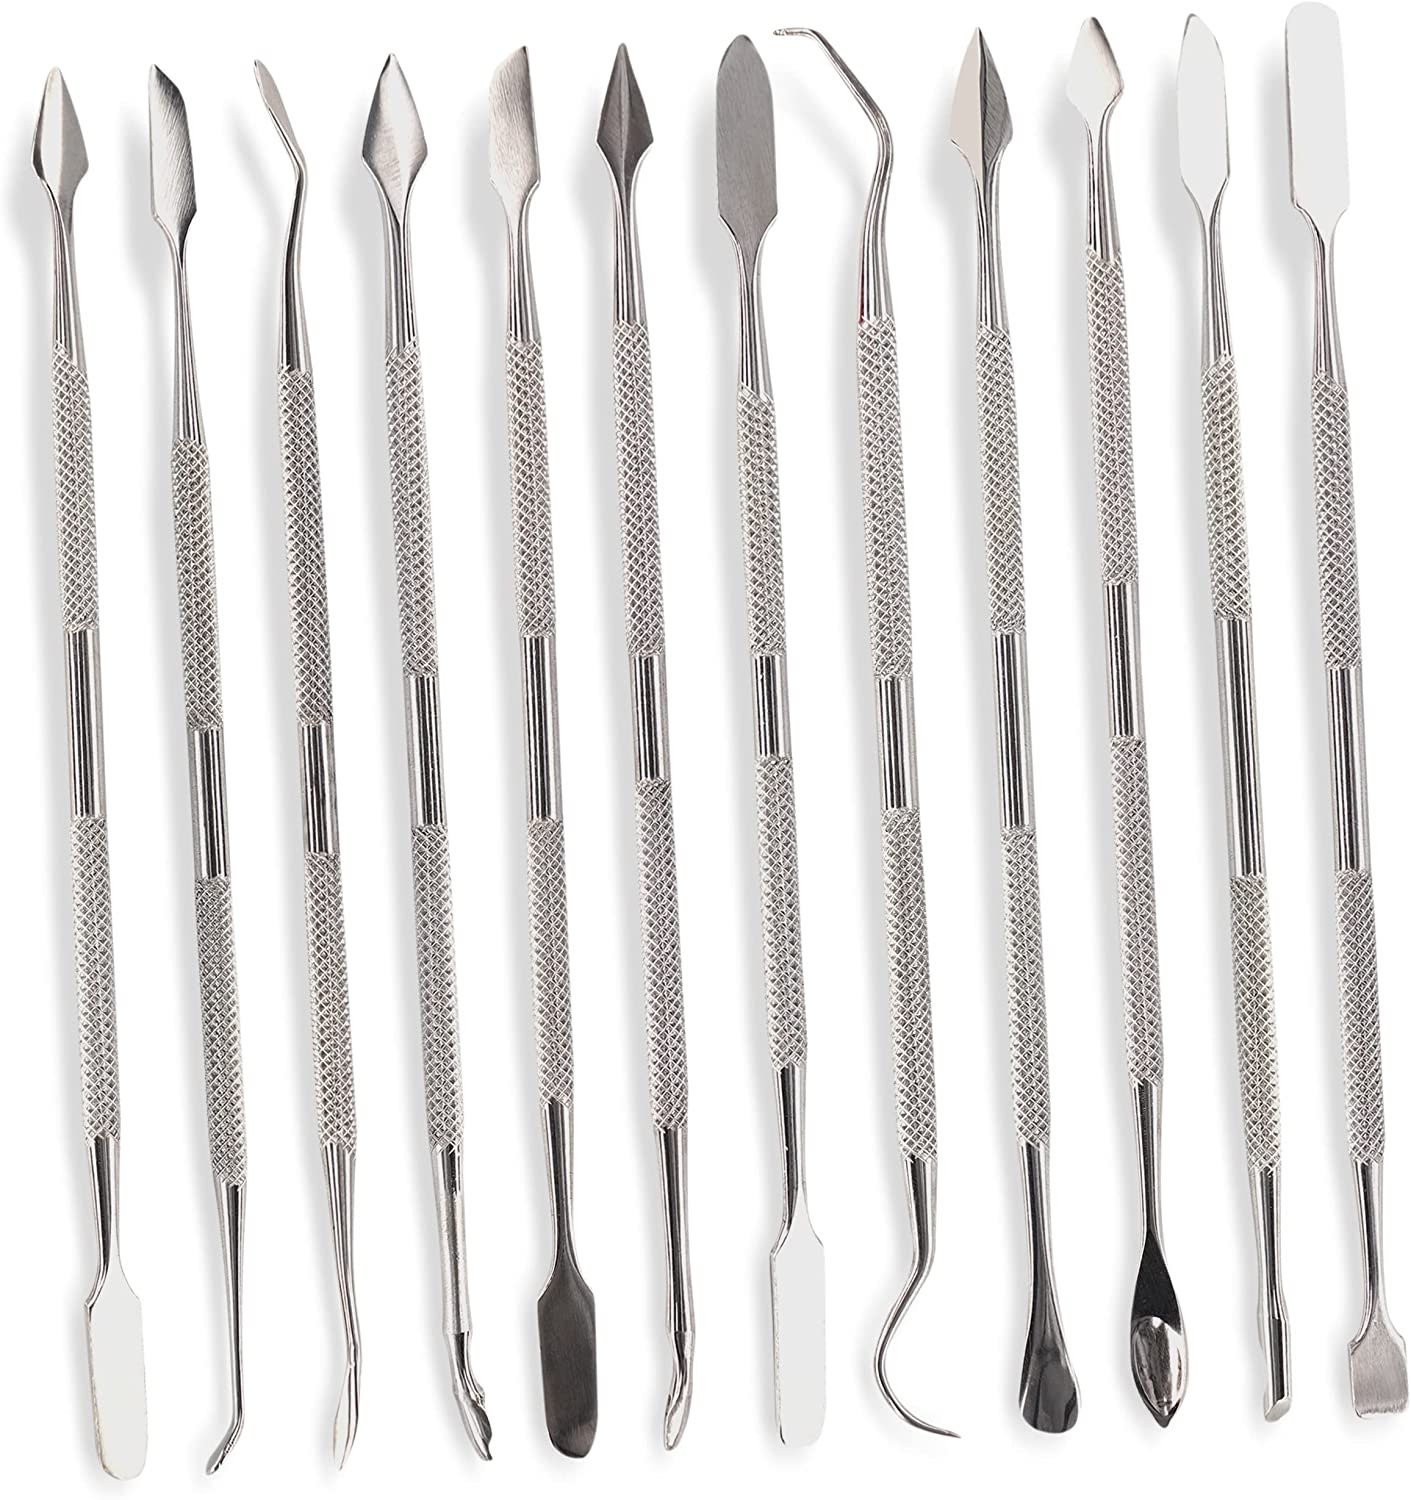 Wax Carving Tools Tool Sculpting Sculpture- Stainless Steel Wax Engraving Kit  Wax Spatula Wax Carving- Tool Set For Dental Use (black Bag)(10pcs)